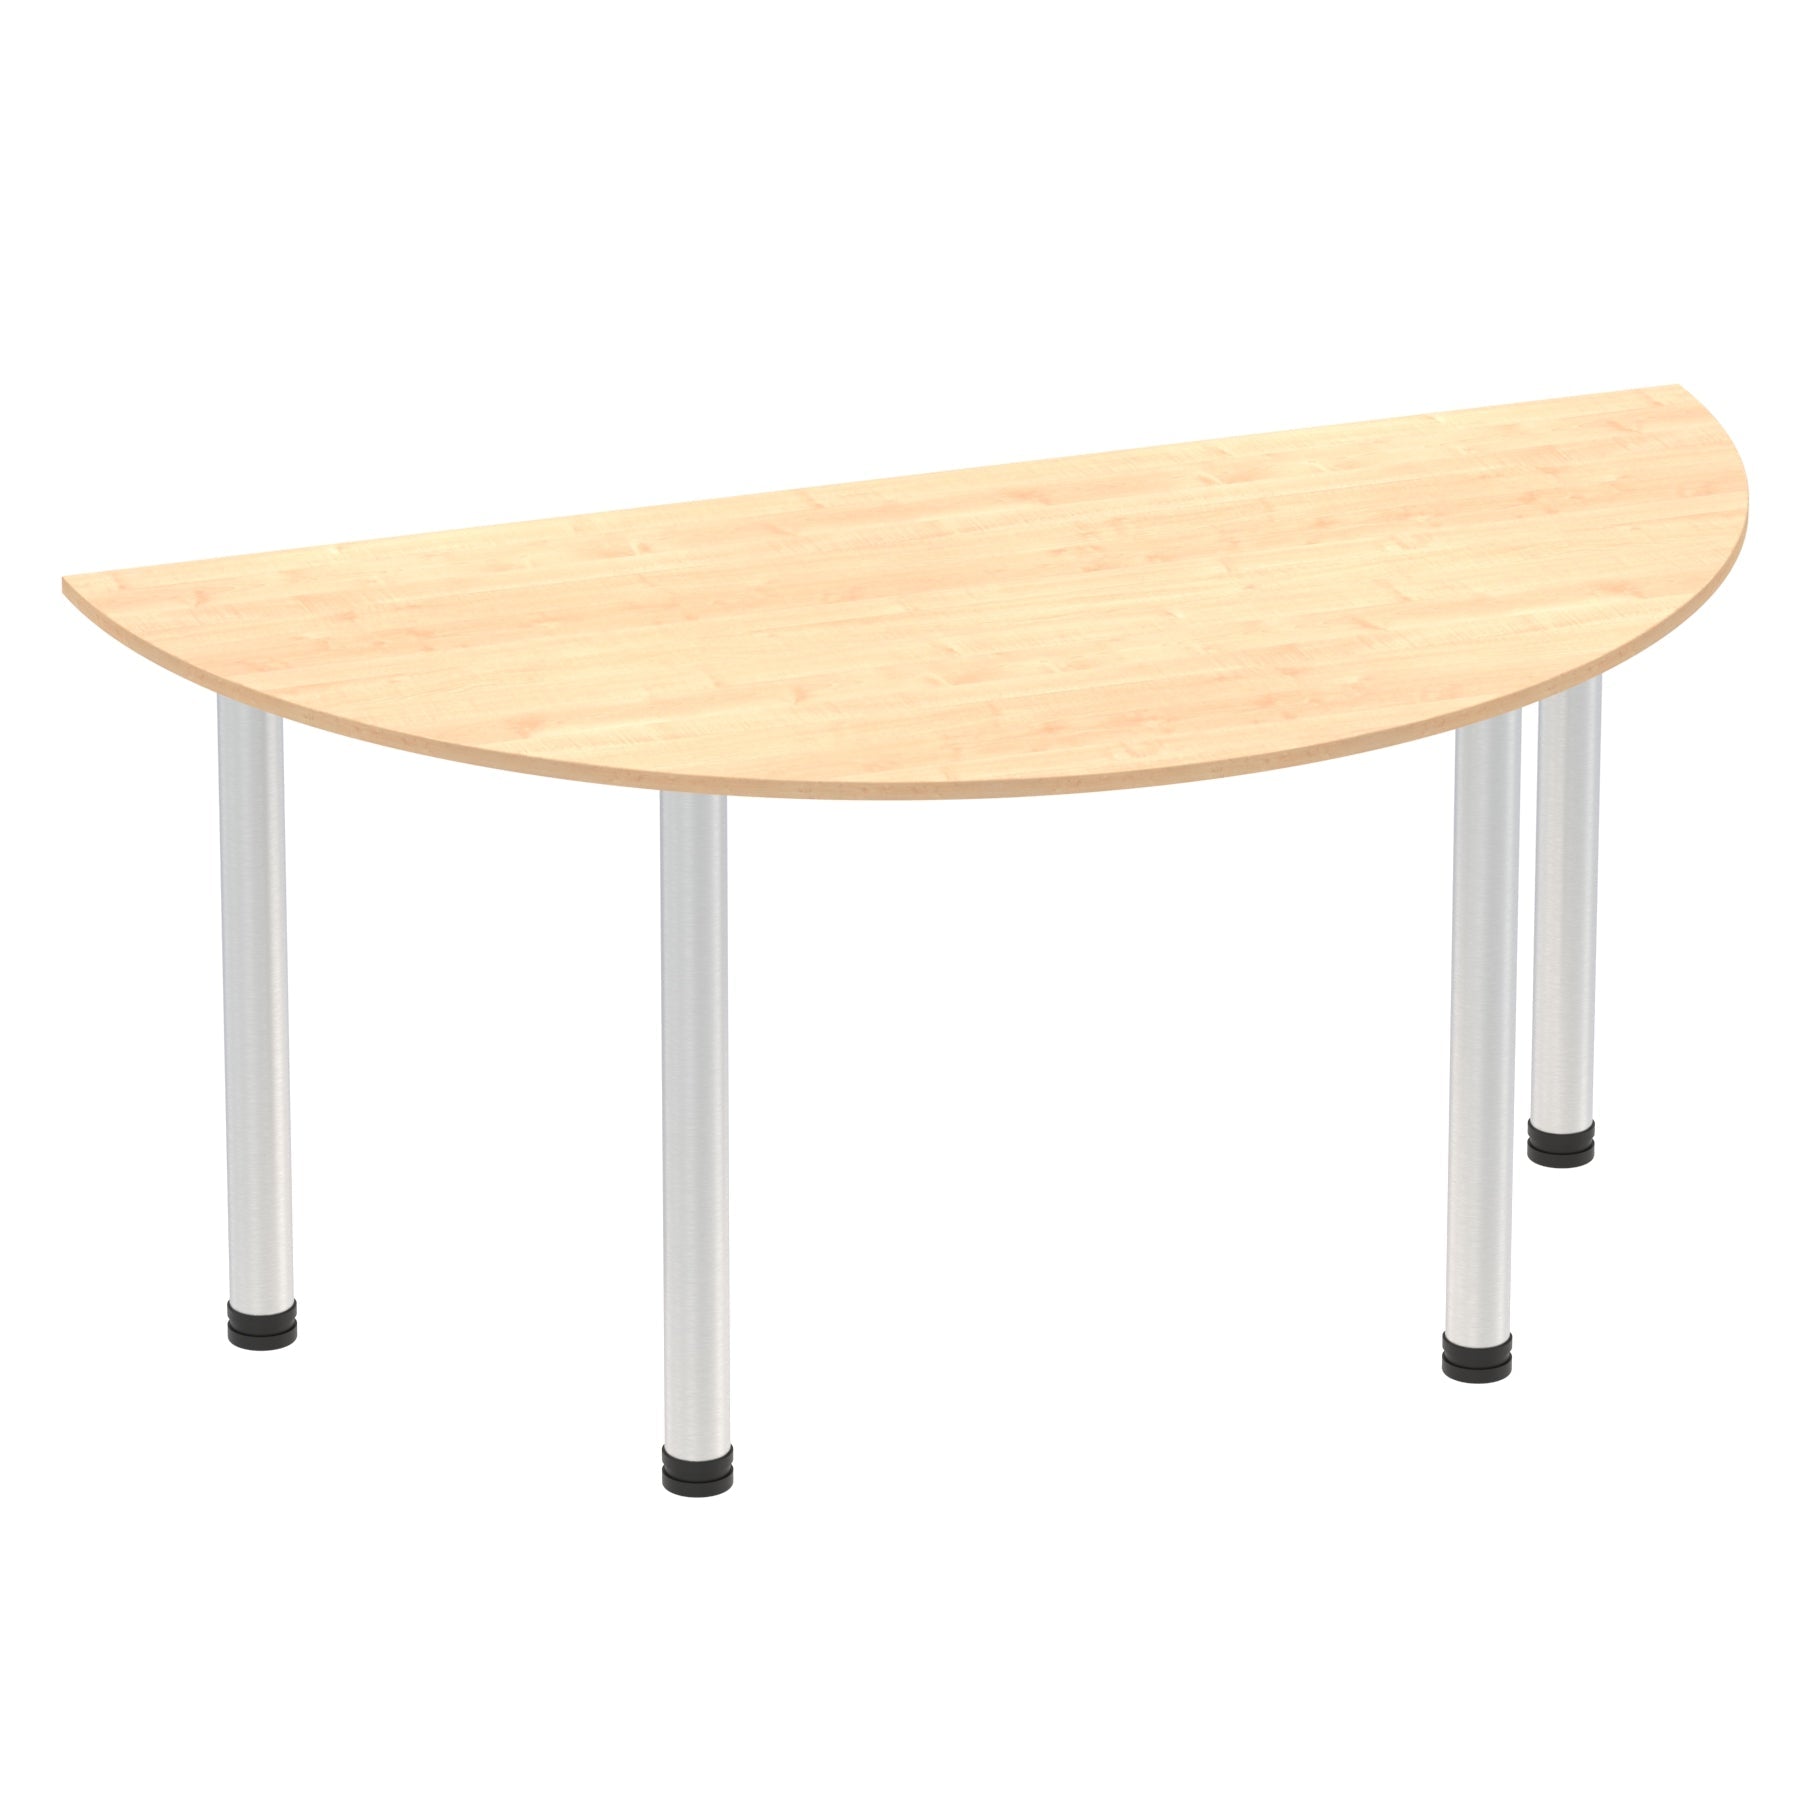 Impulse Semi-Circle Table 1600x800mm with Post Leg - MFC Material, 5-Year Guarantee, Self-Assembly, Multiple Frame Colours